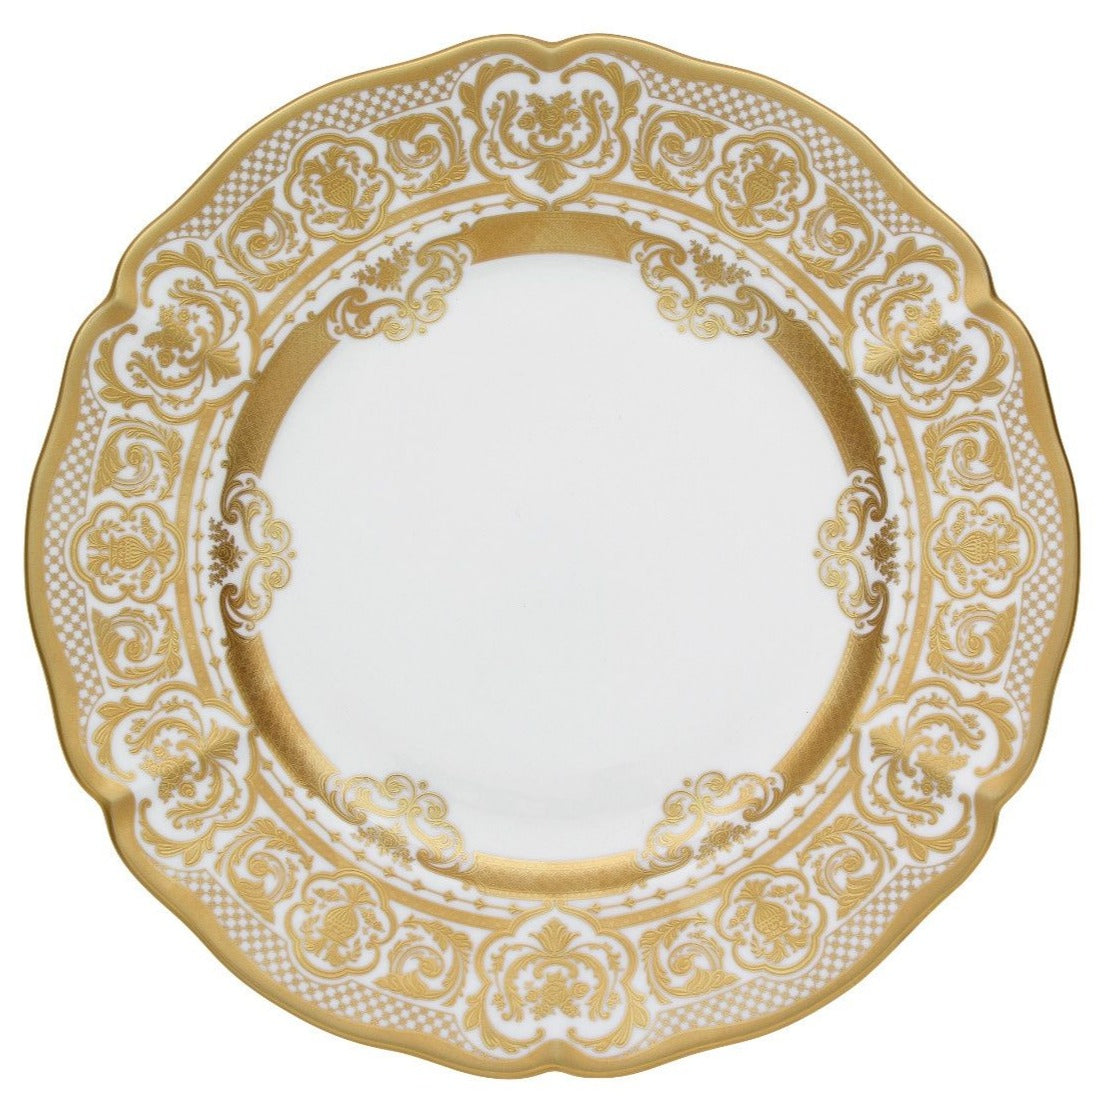 Prouna Carlsbad Queen White Charger Plate White Background Photo